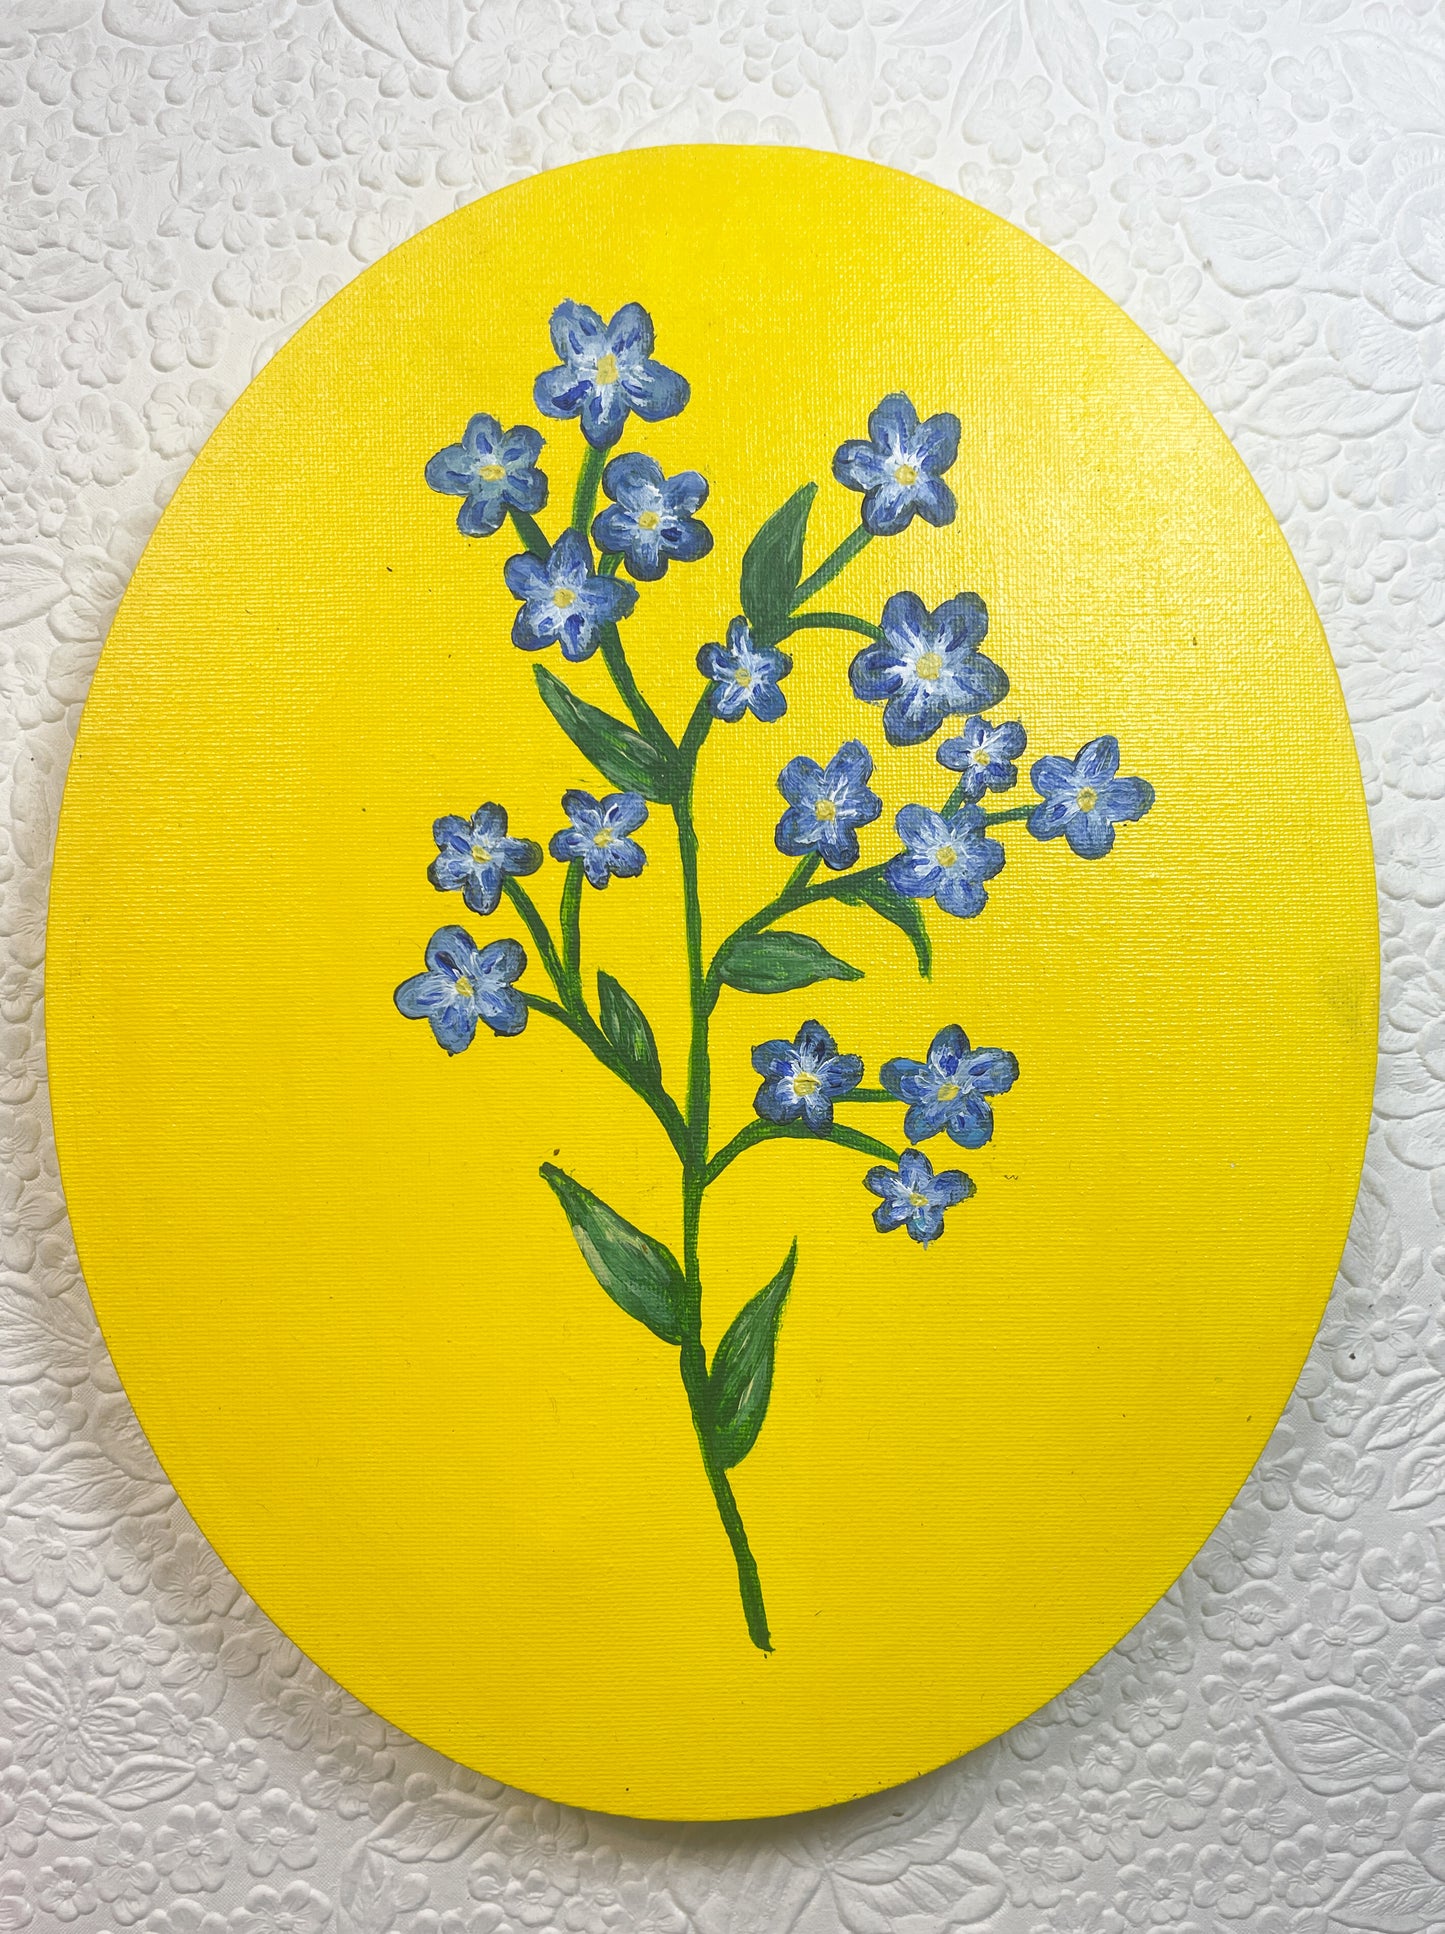 Forget-Me-Not | Original on Canvas